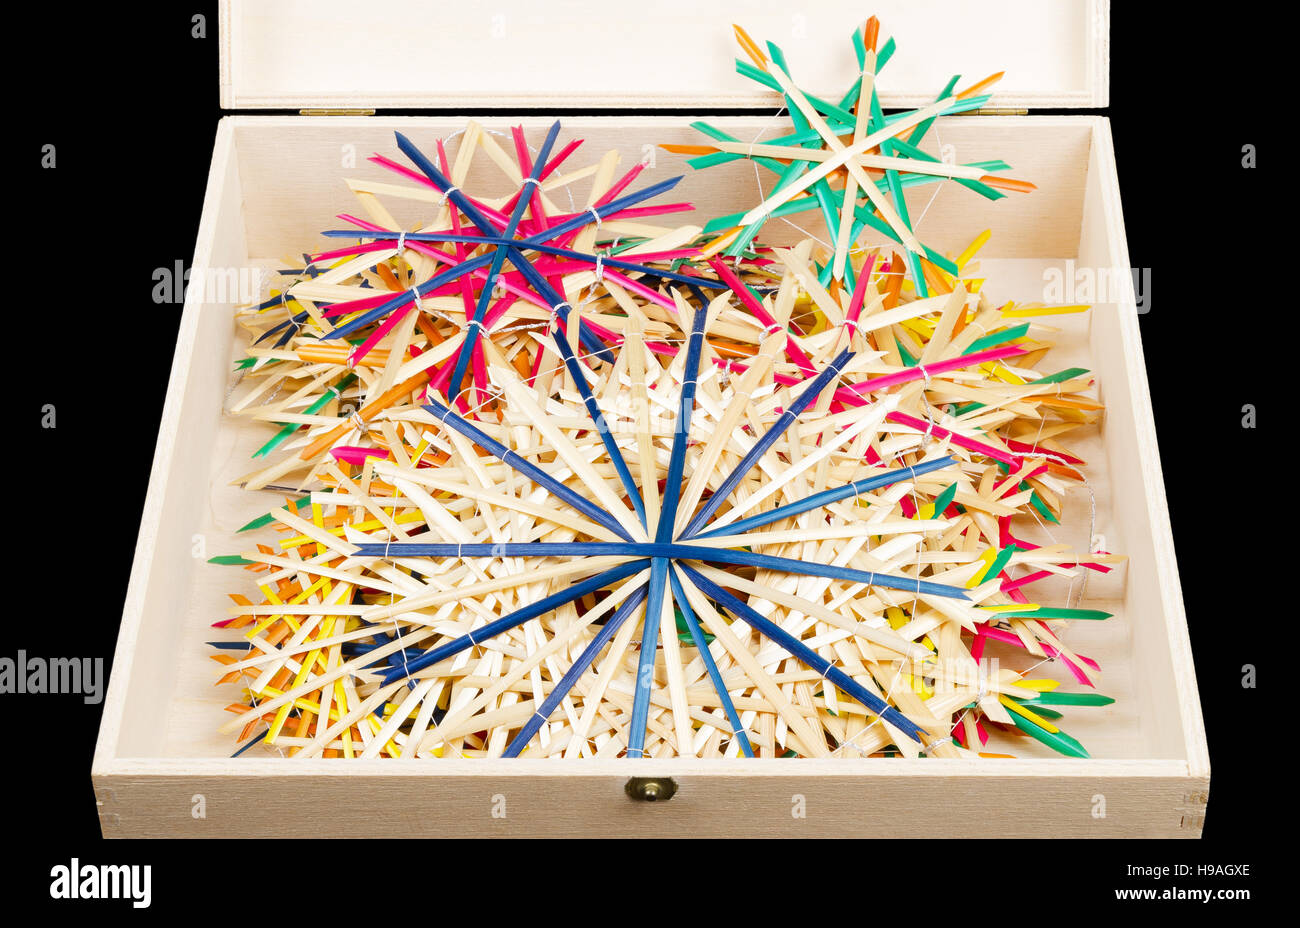 Straw stars Christmas decoration in wooden box. Handmade colorful decor for windows, as gifts or to hang on the xmas tree. Stock Photo